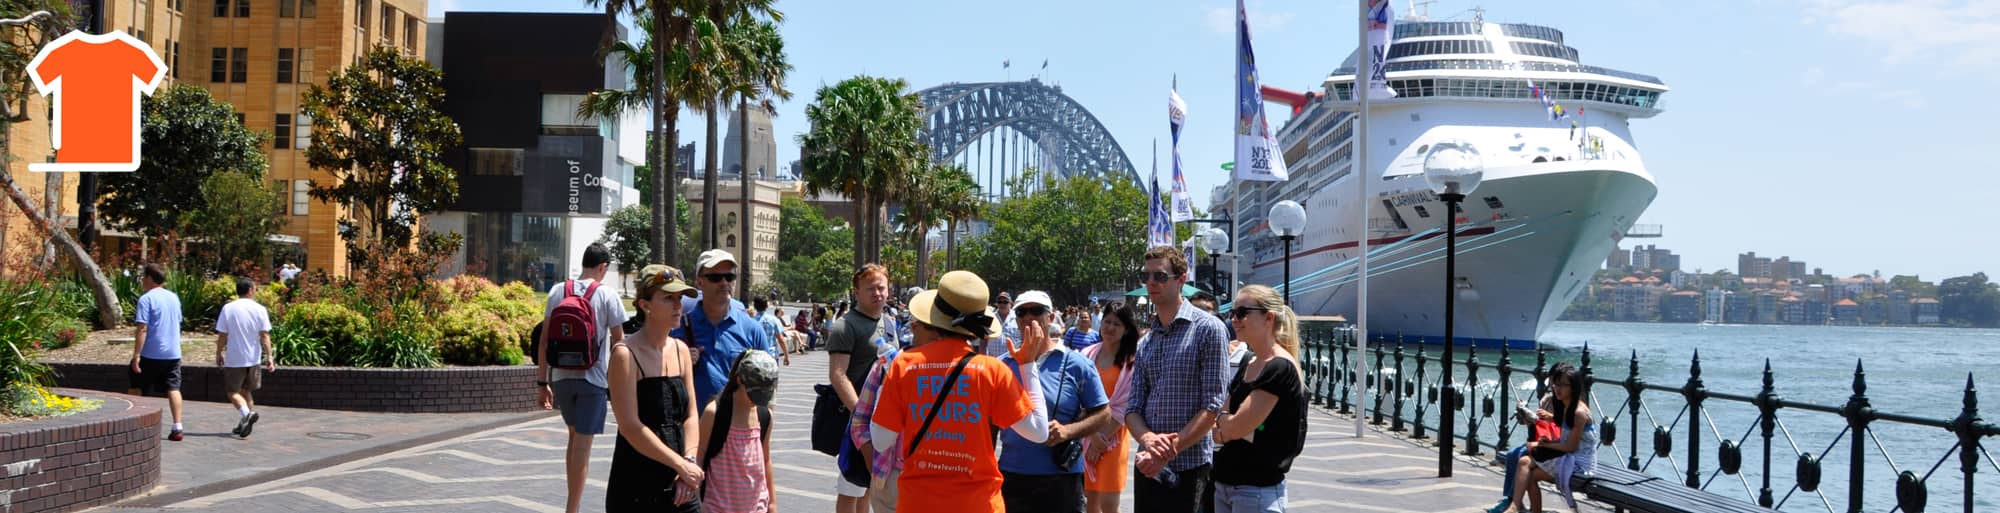 A group of tourists who joined Sydney Walking Tour are learning about the history of The Rocks from a tour guide in orange Locl Tour Sydney uniform. The tour guide is pointing to a historical sight and telling the group about its significance.